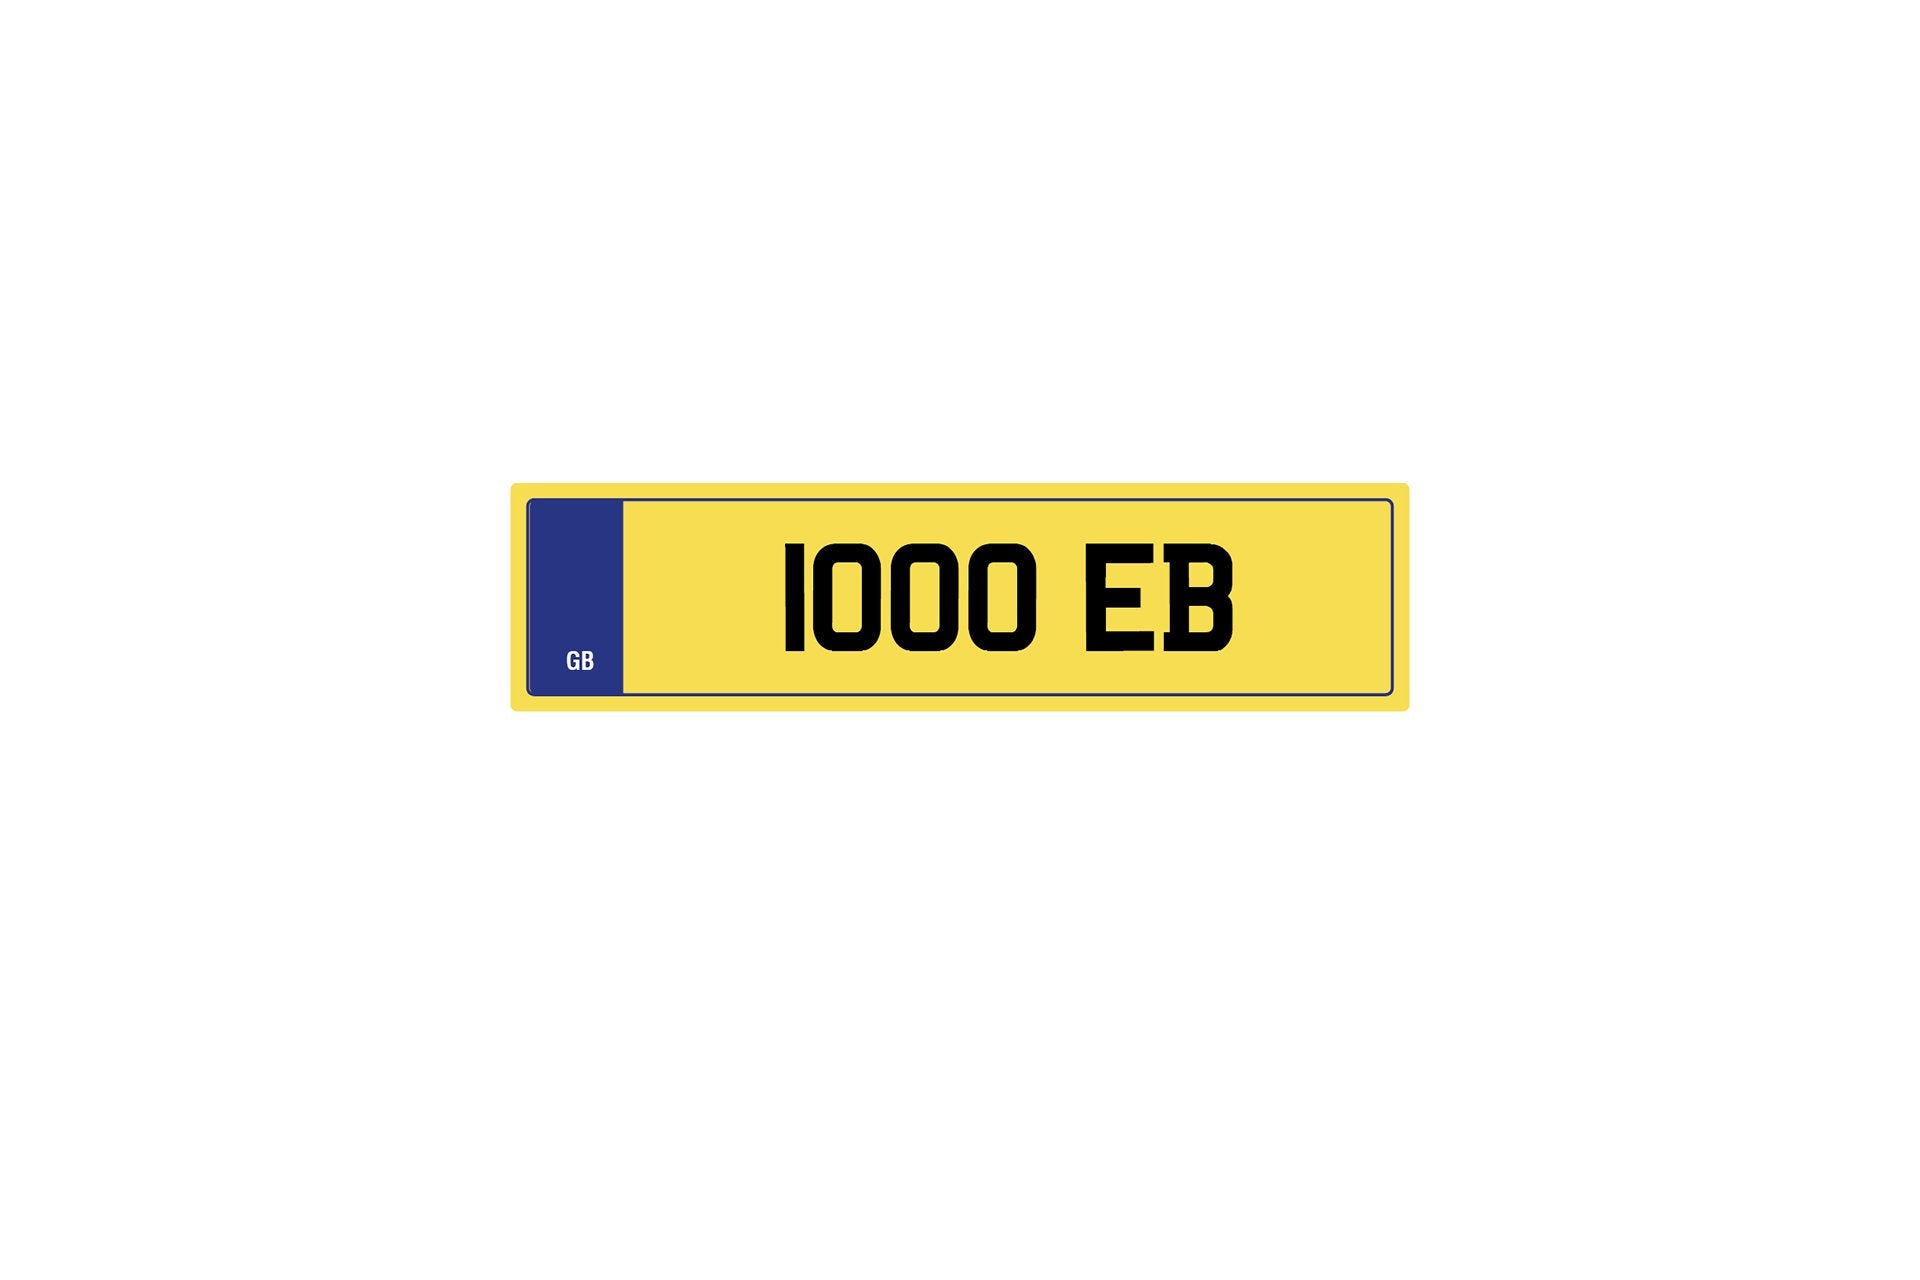 Private Plate 1000 Eb by Kahn - Image 261